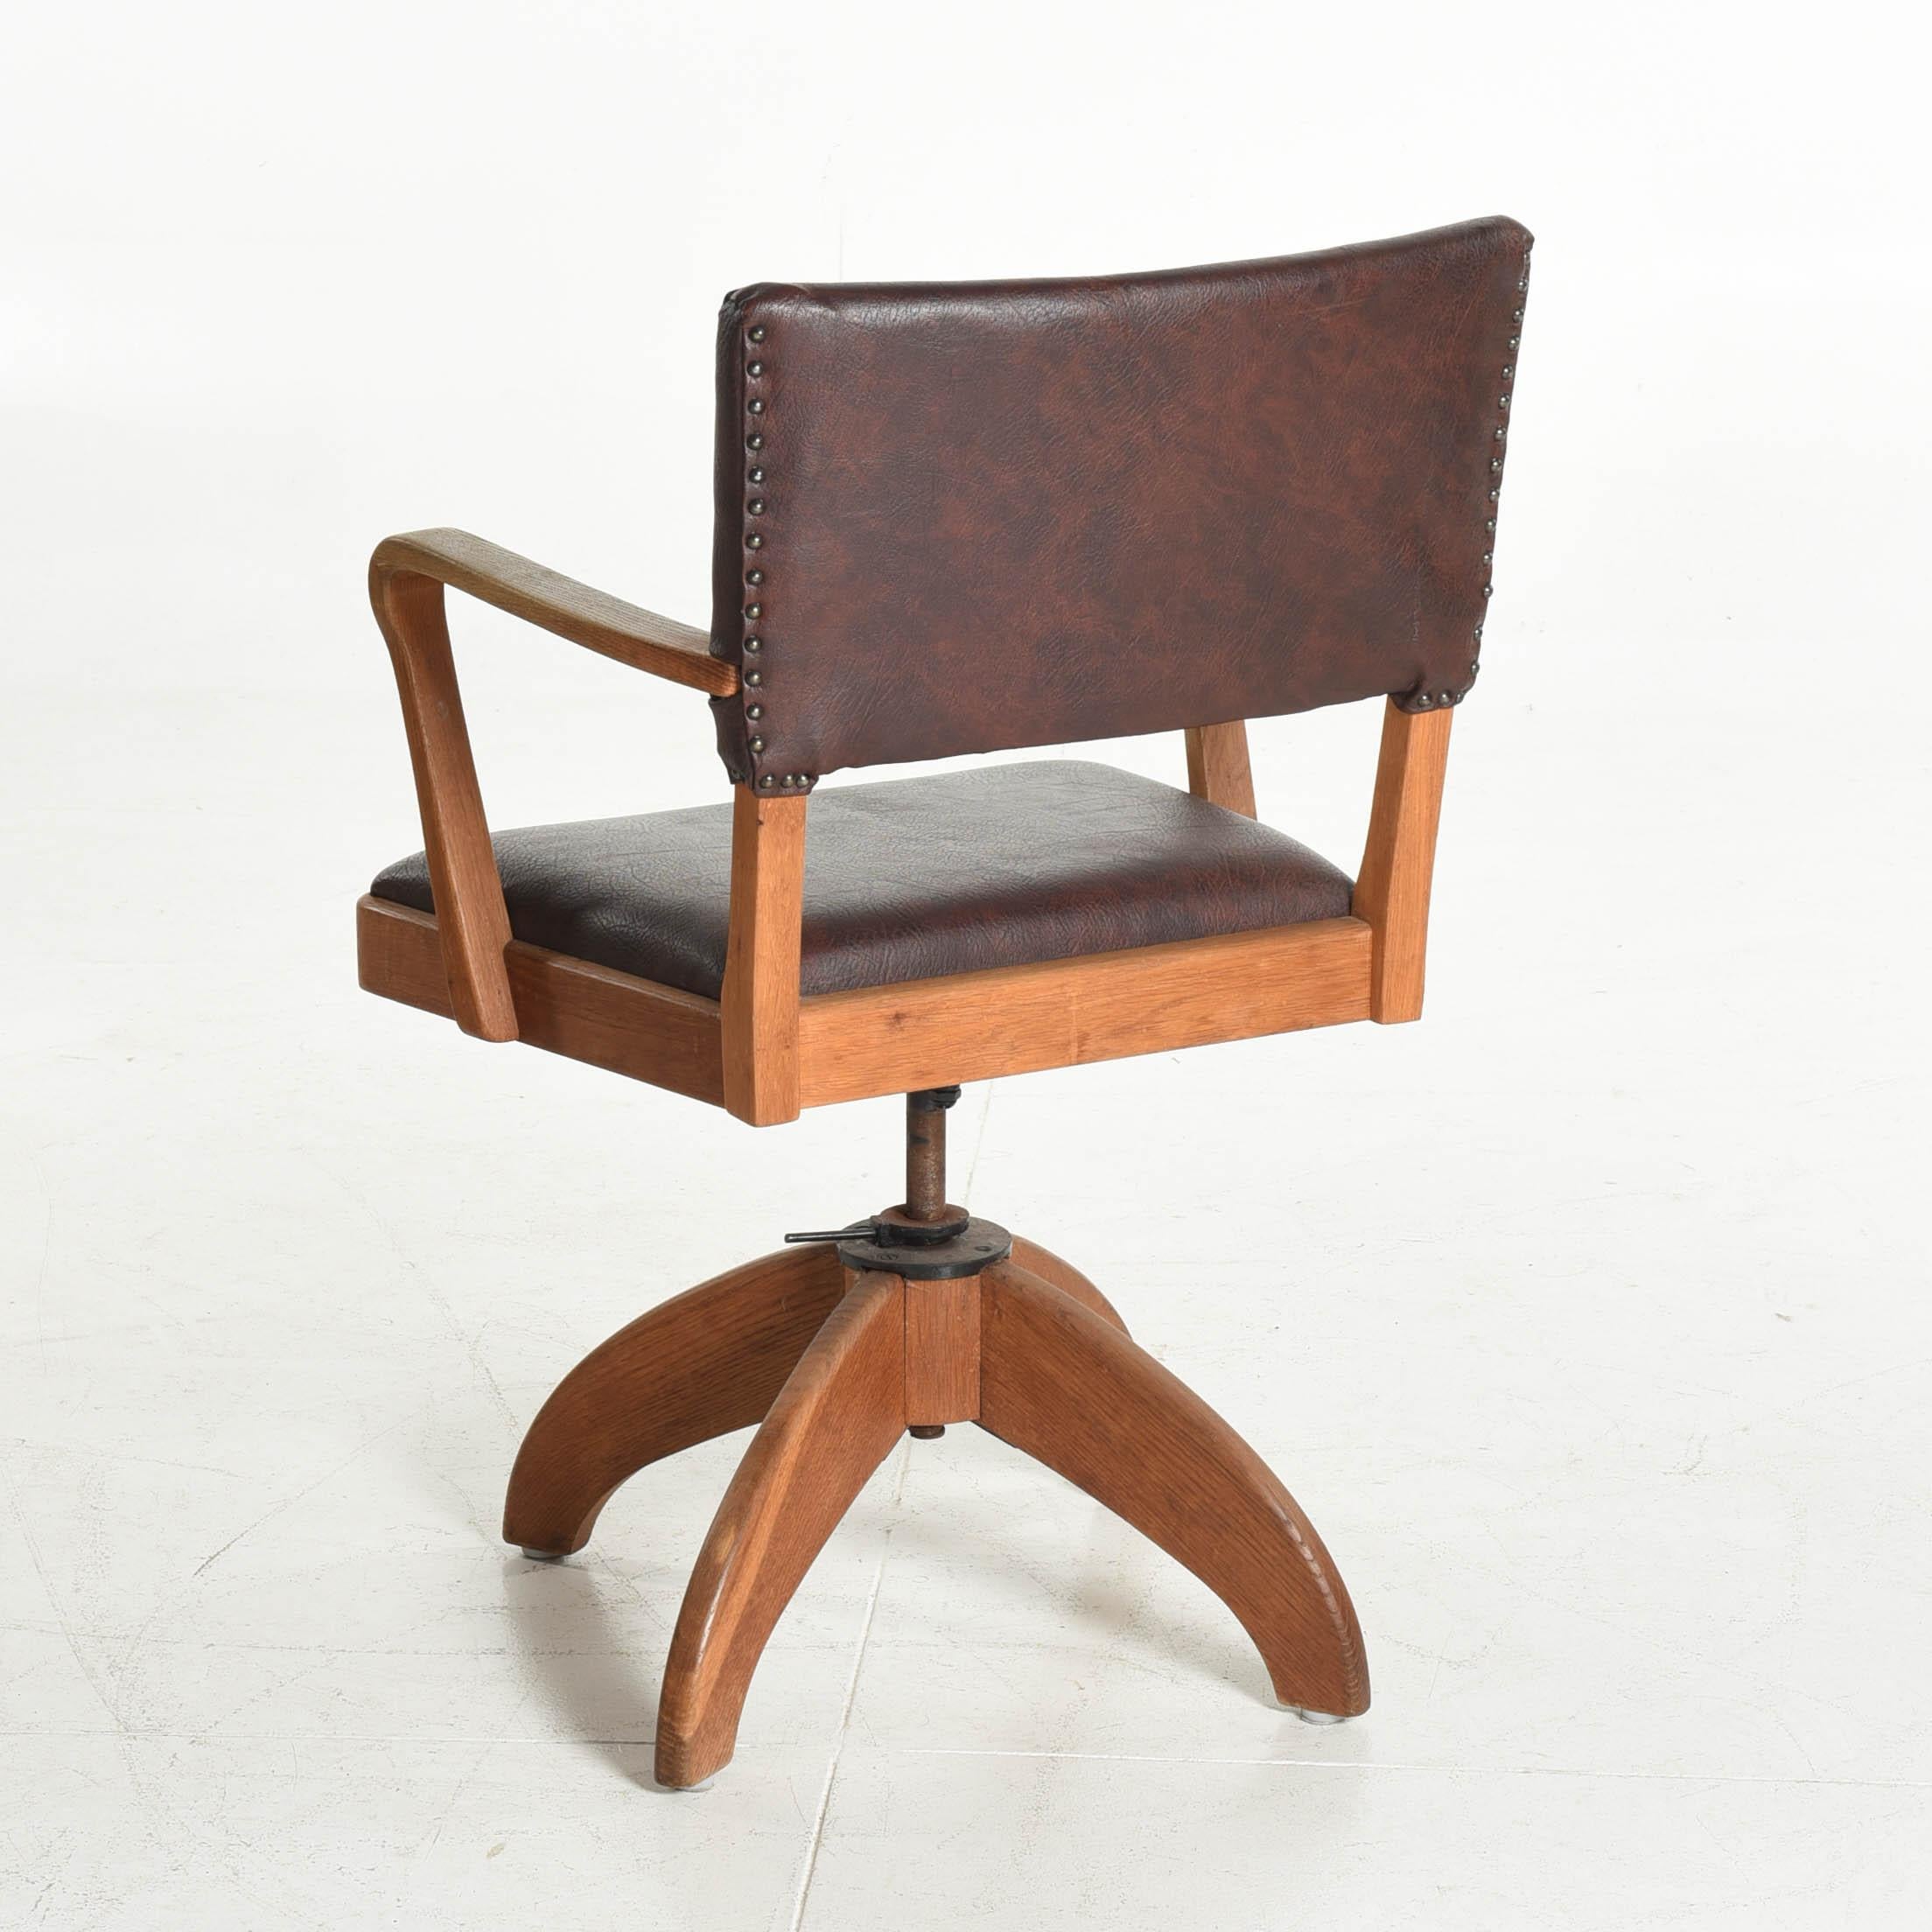 Art Deco swivel armchair made in oak by Gunnar Ericsson for Facit AB in Atvidaberg, Sweden, circa 1930.
Seat height-adjustable spinning function.

Chair with new upholstery.

Very good conditions.